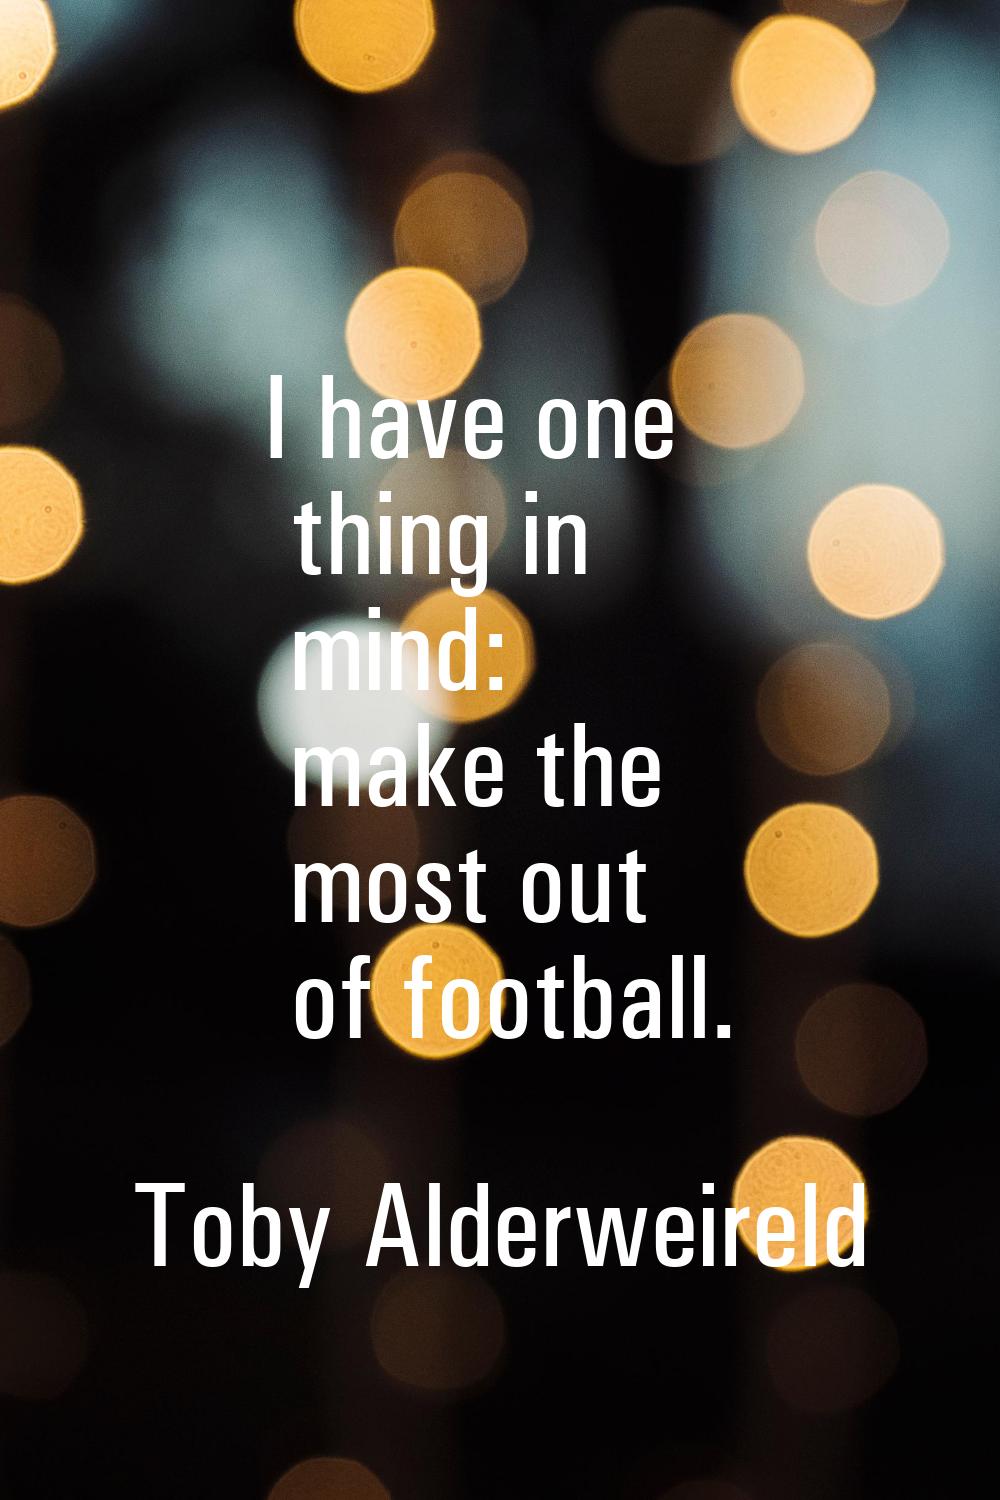 I have one thing in mind: make the most out of football.